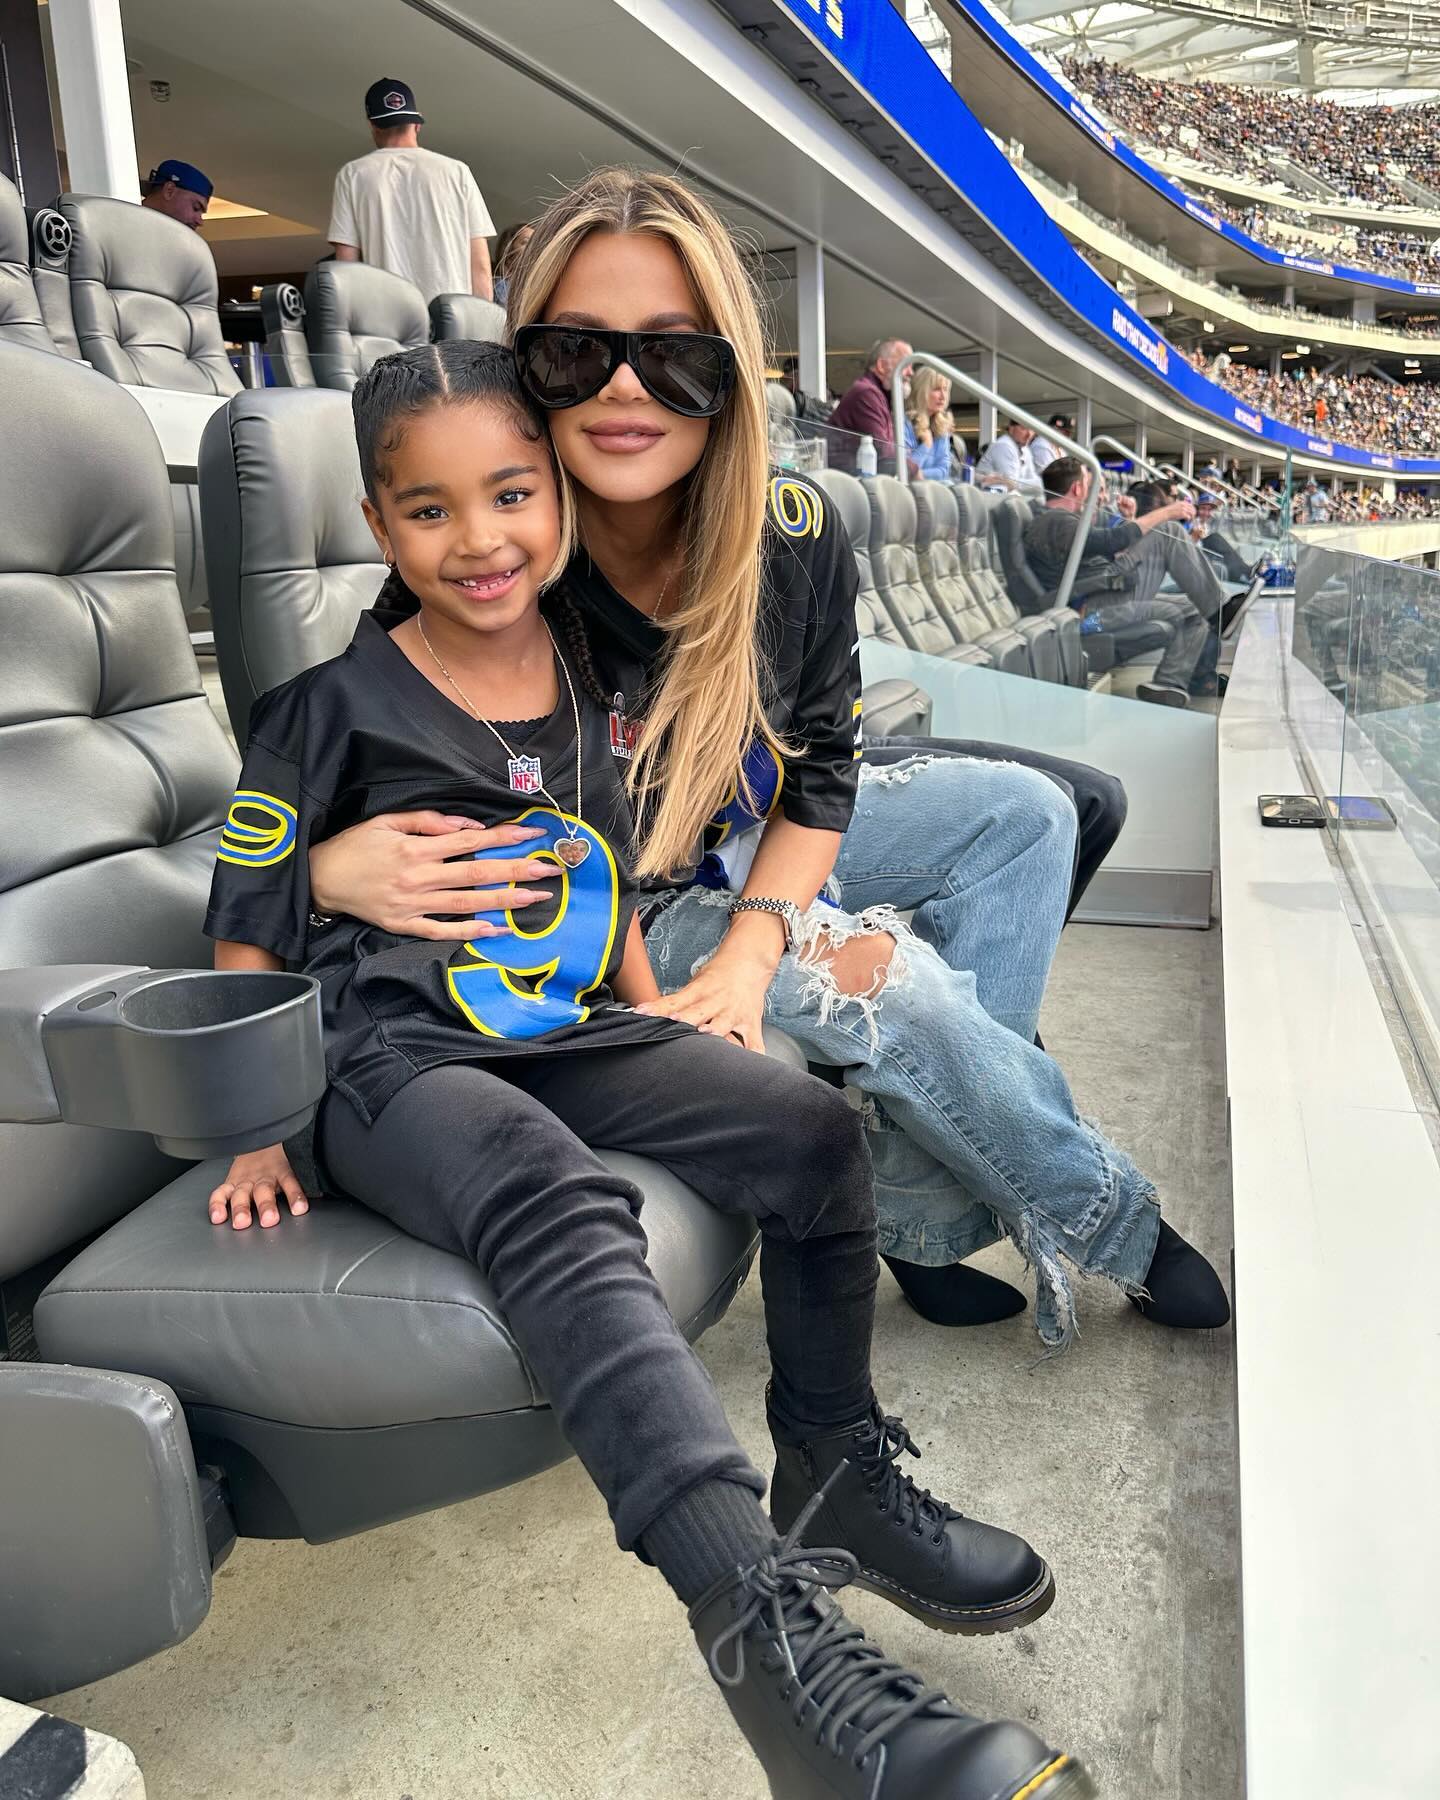 Khloe recently dropped $100,000 on a VIP suite for True's first NFL game